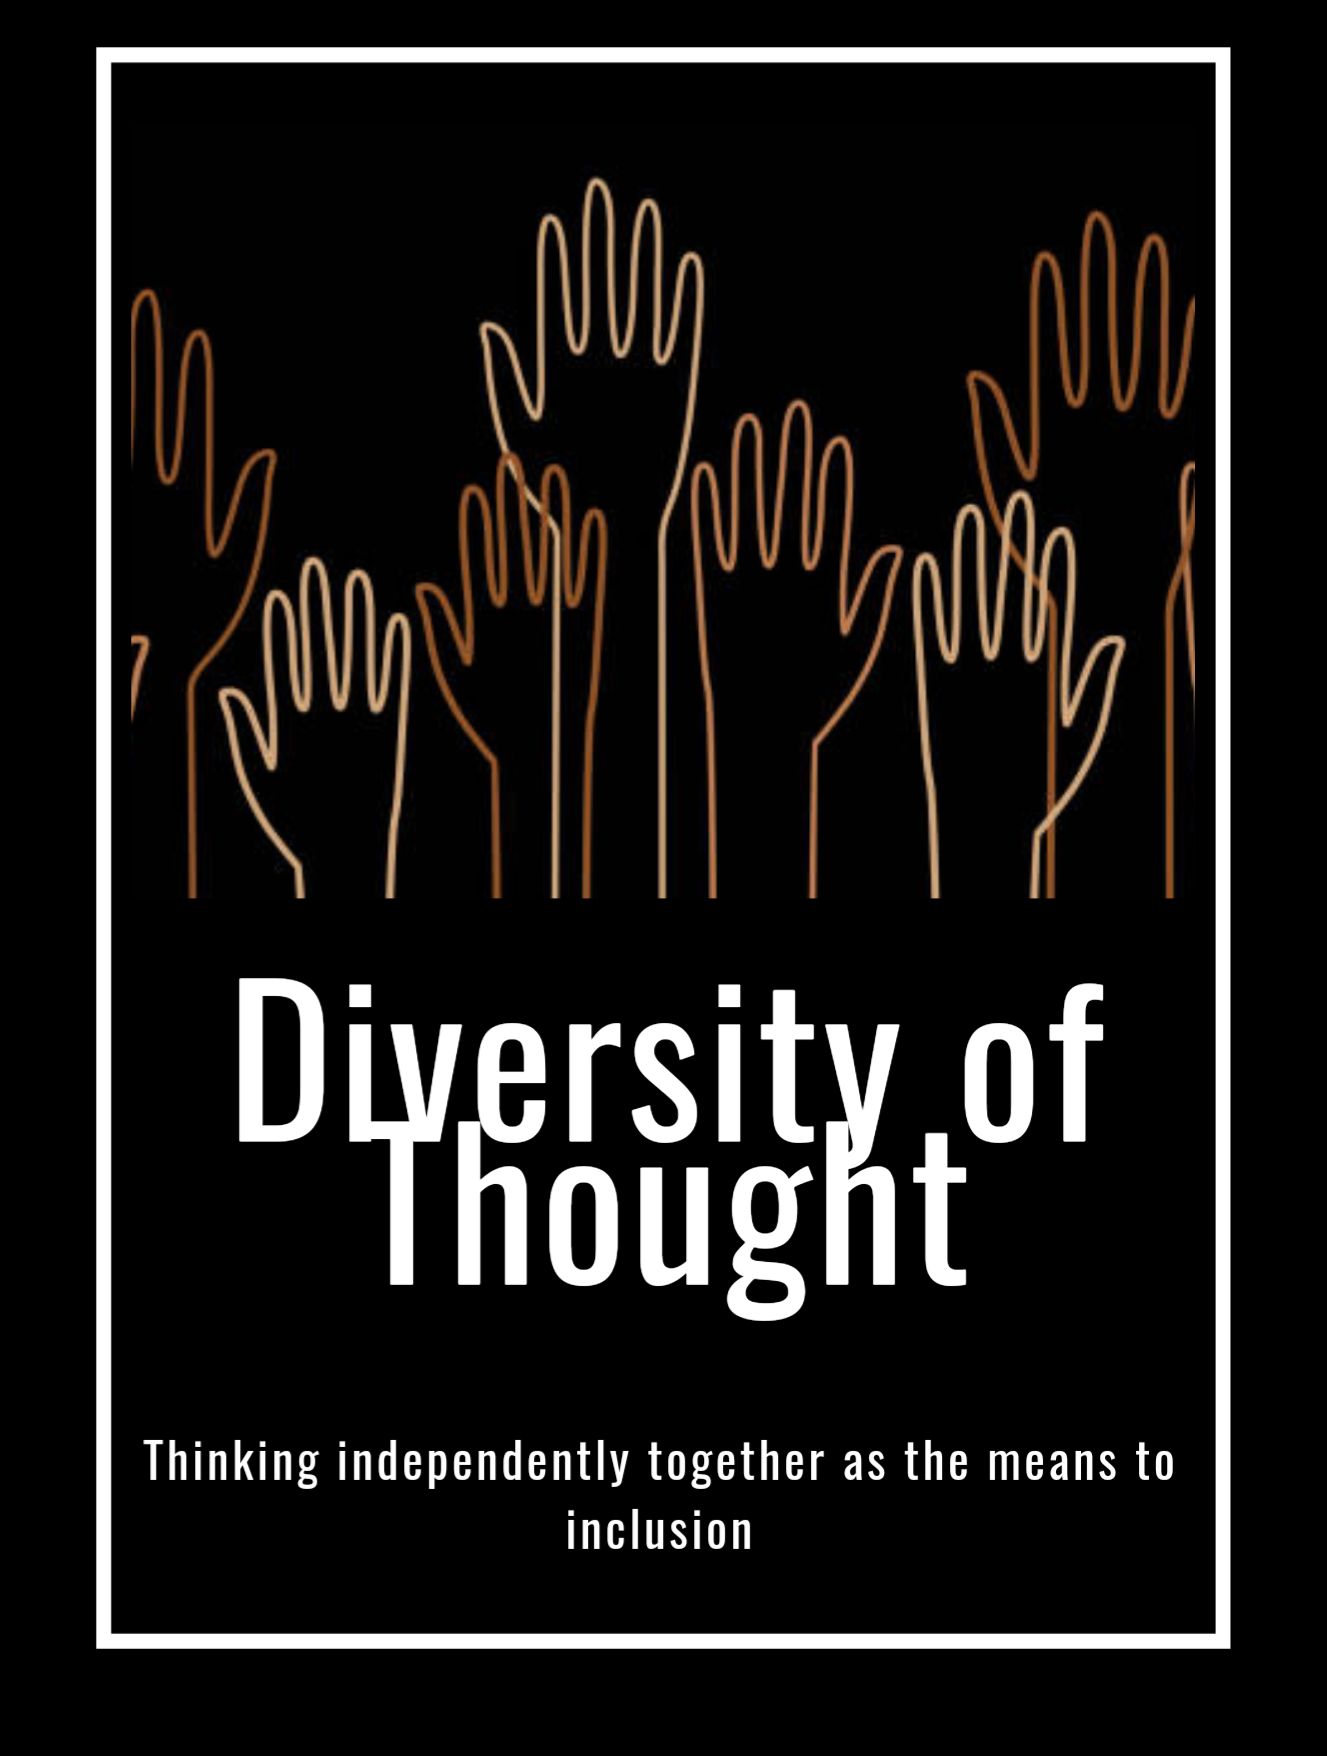 Diversity of Thought by Aidan Hunter